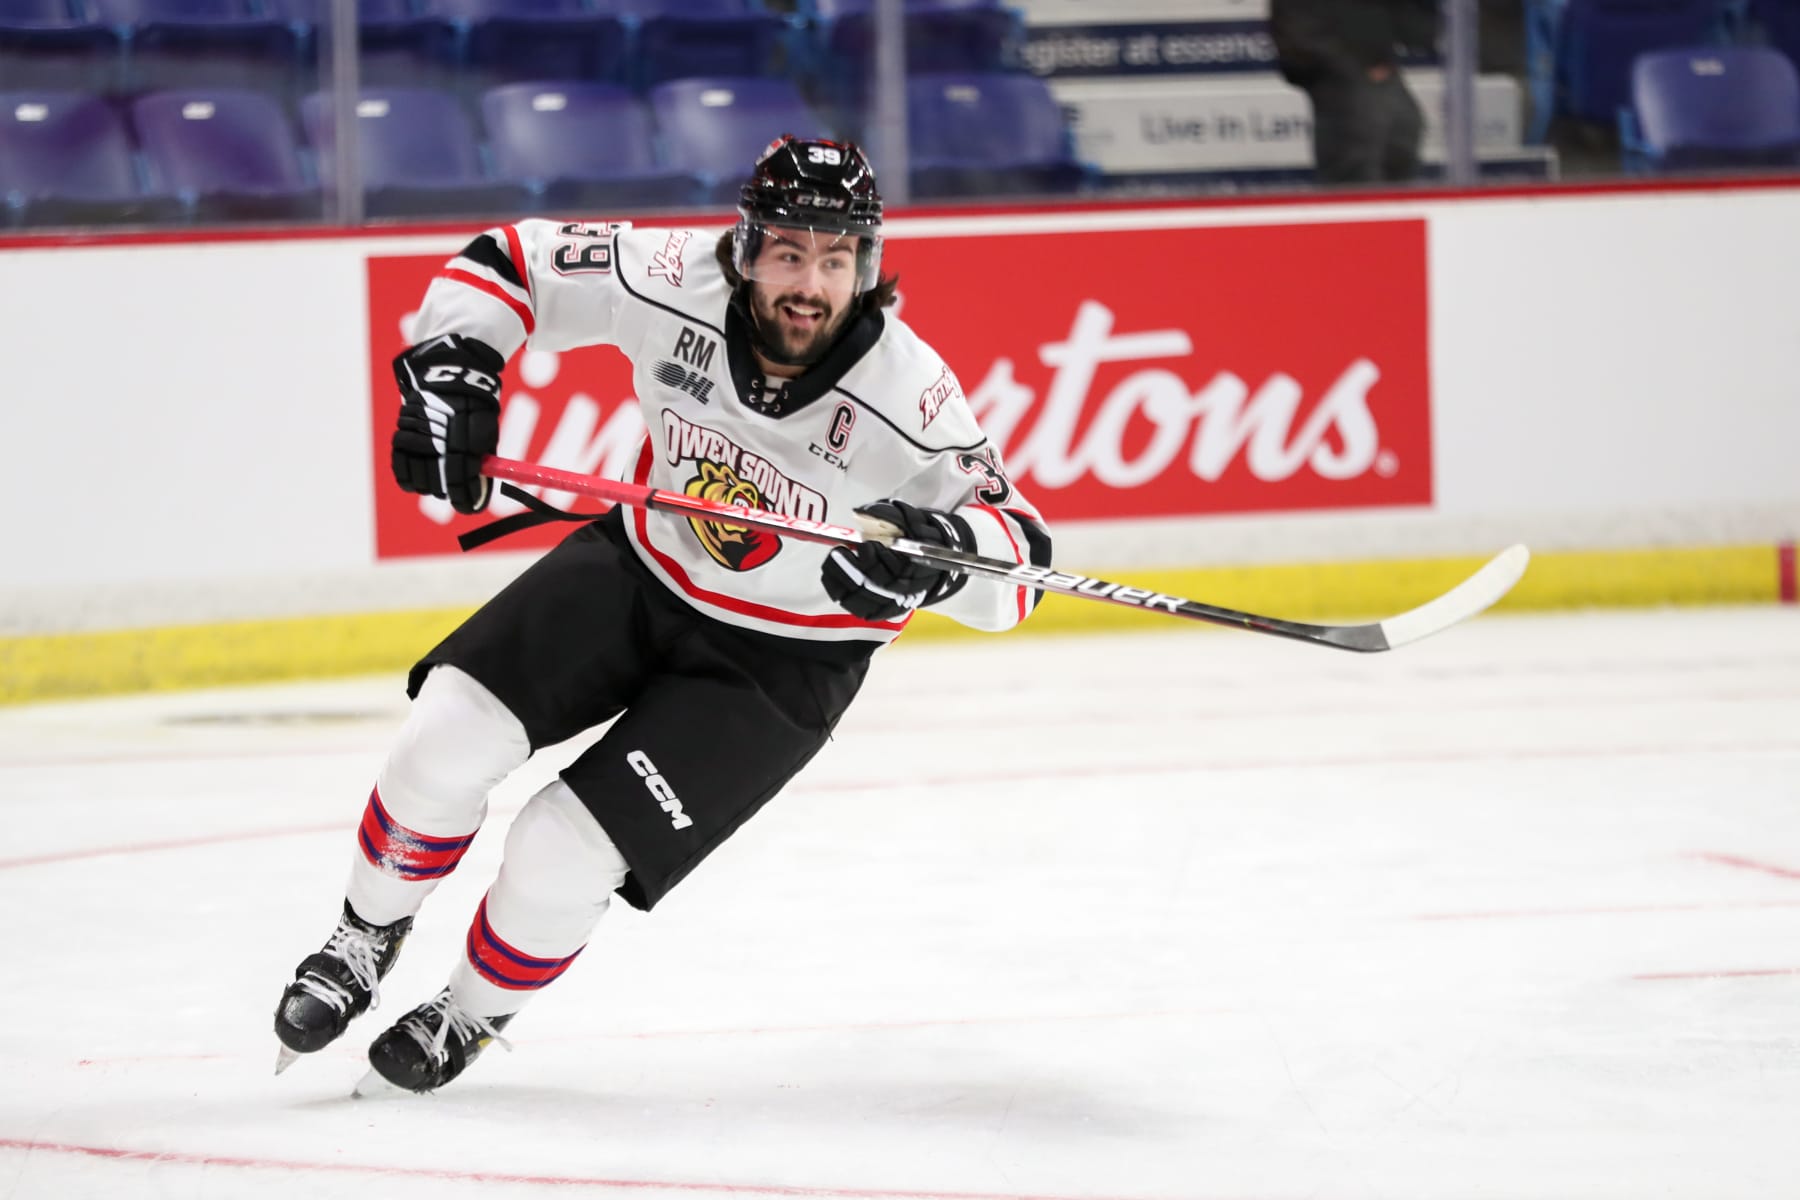 Top Canadian prospect Bowen Byram aims to be next Morgan Rielly